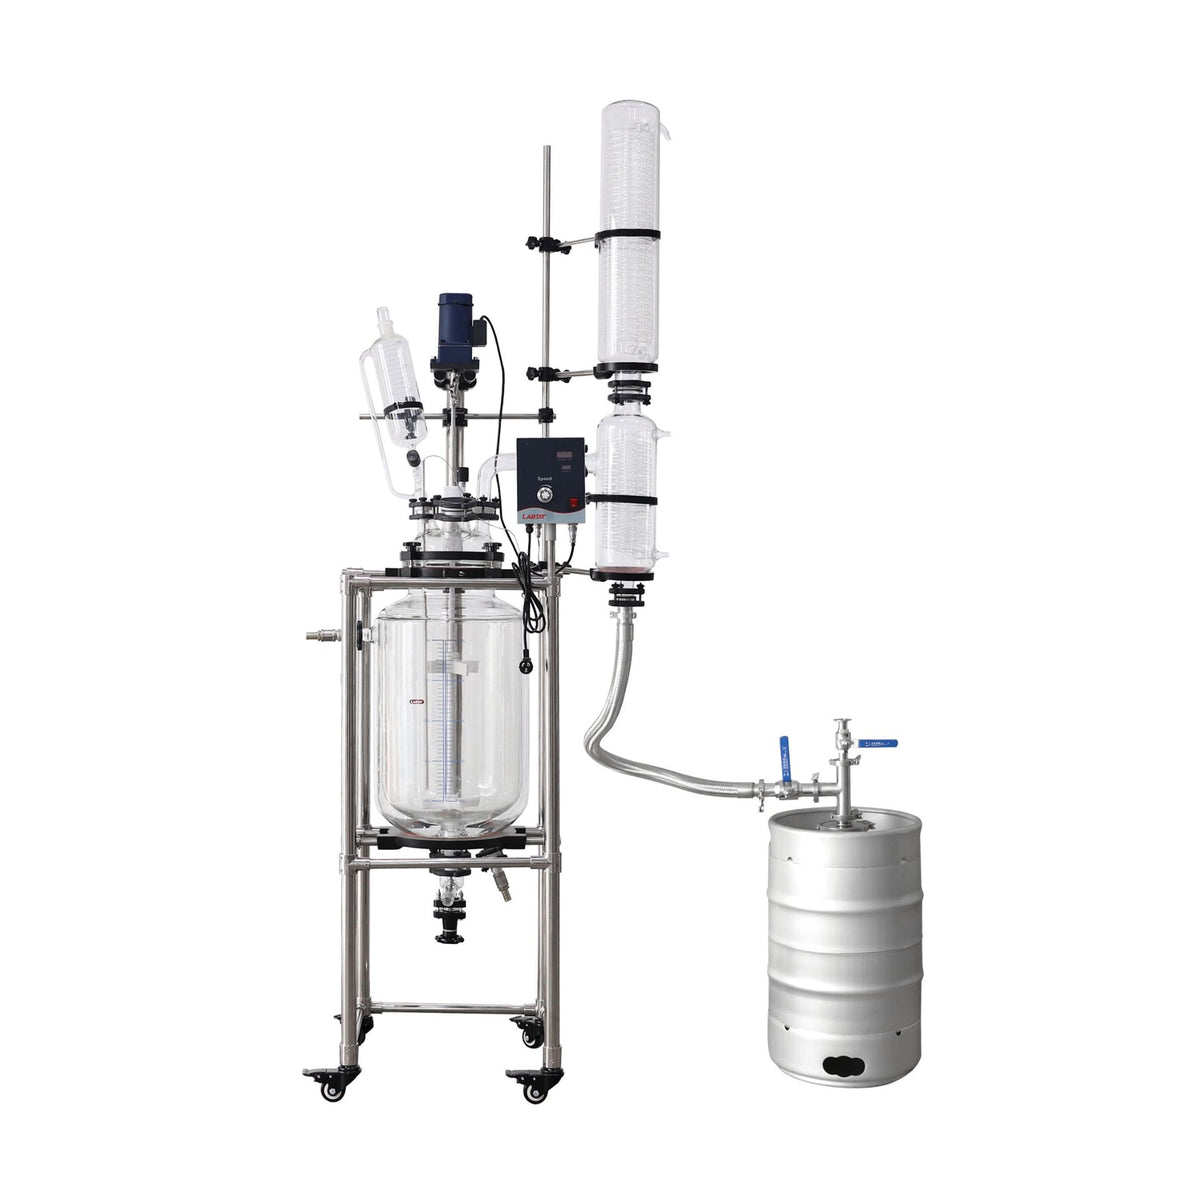 100L Jacketed Glass Evaporation Reactor Vessel Chemistry with Digital Display